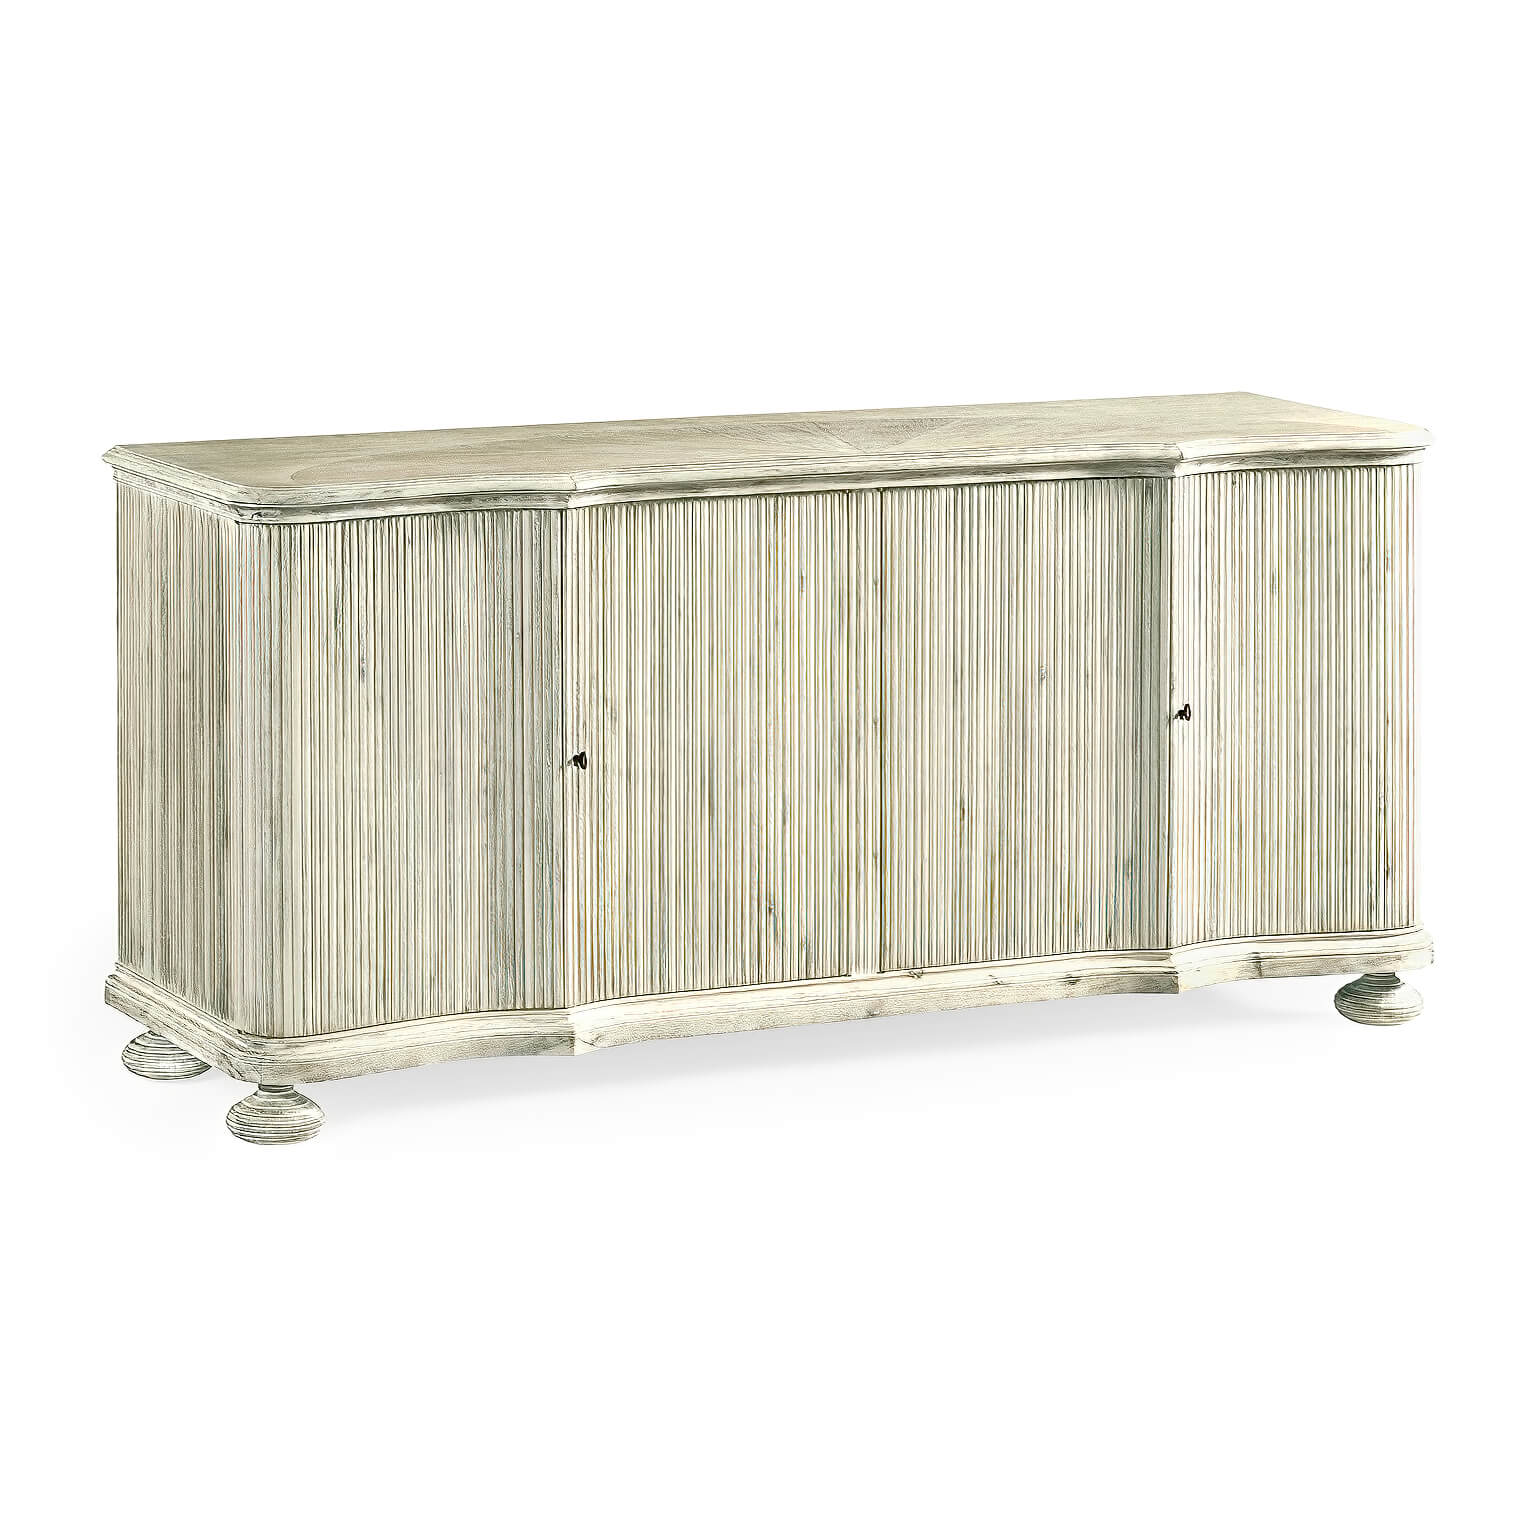 Reeded White Washed Buffet Cabinet - English Georgian America